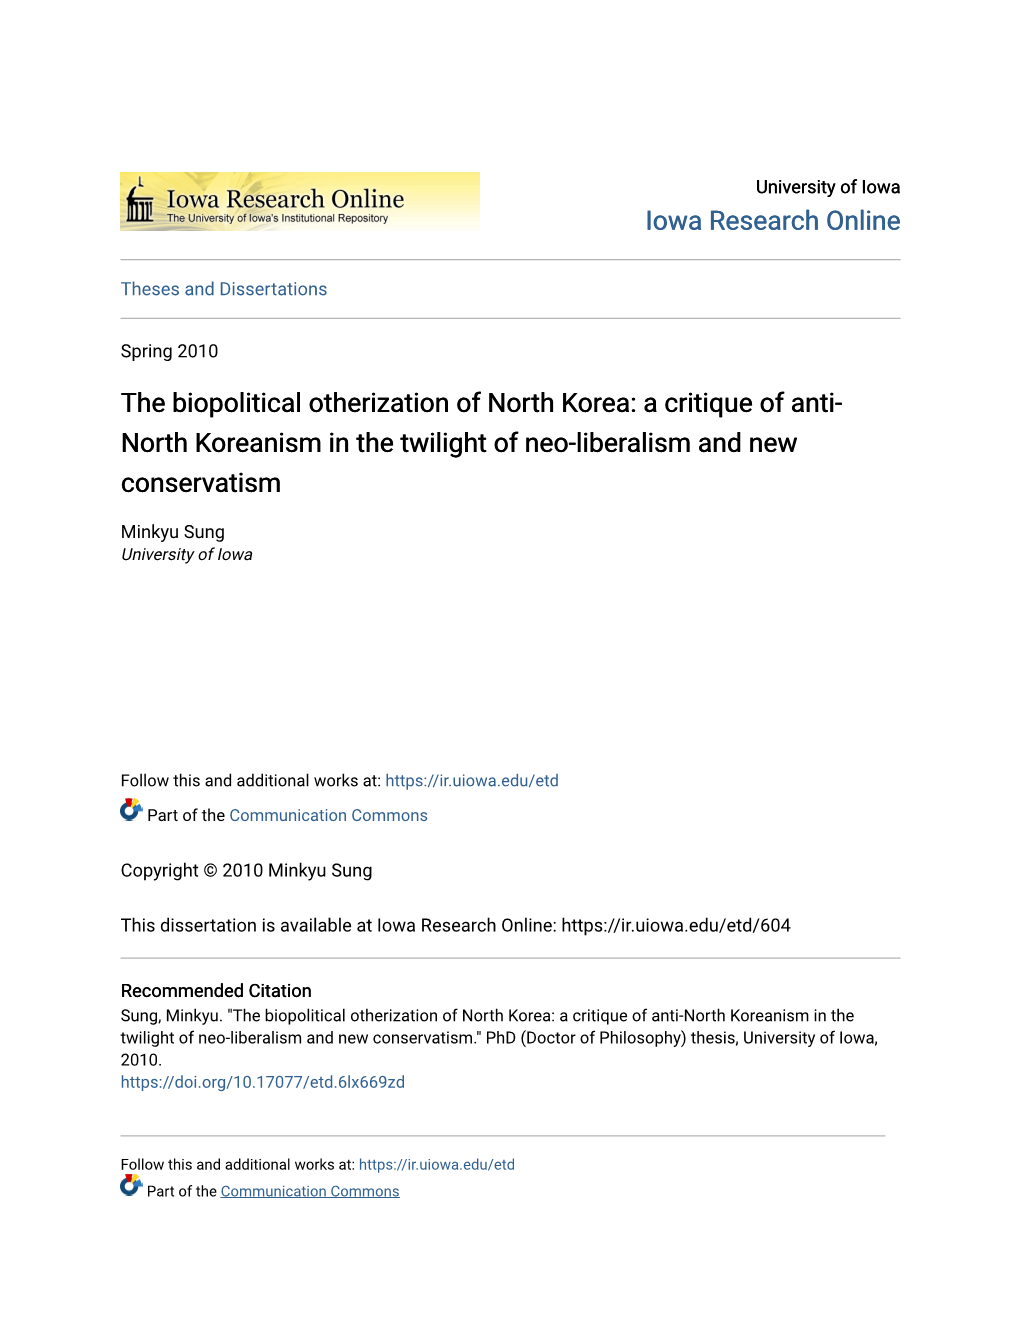 The Biopolitical Otherization of North Korea: a Critique of Anti- North Koreanism in the Twilight of Neo-Liberalism and New Conservatism